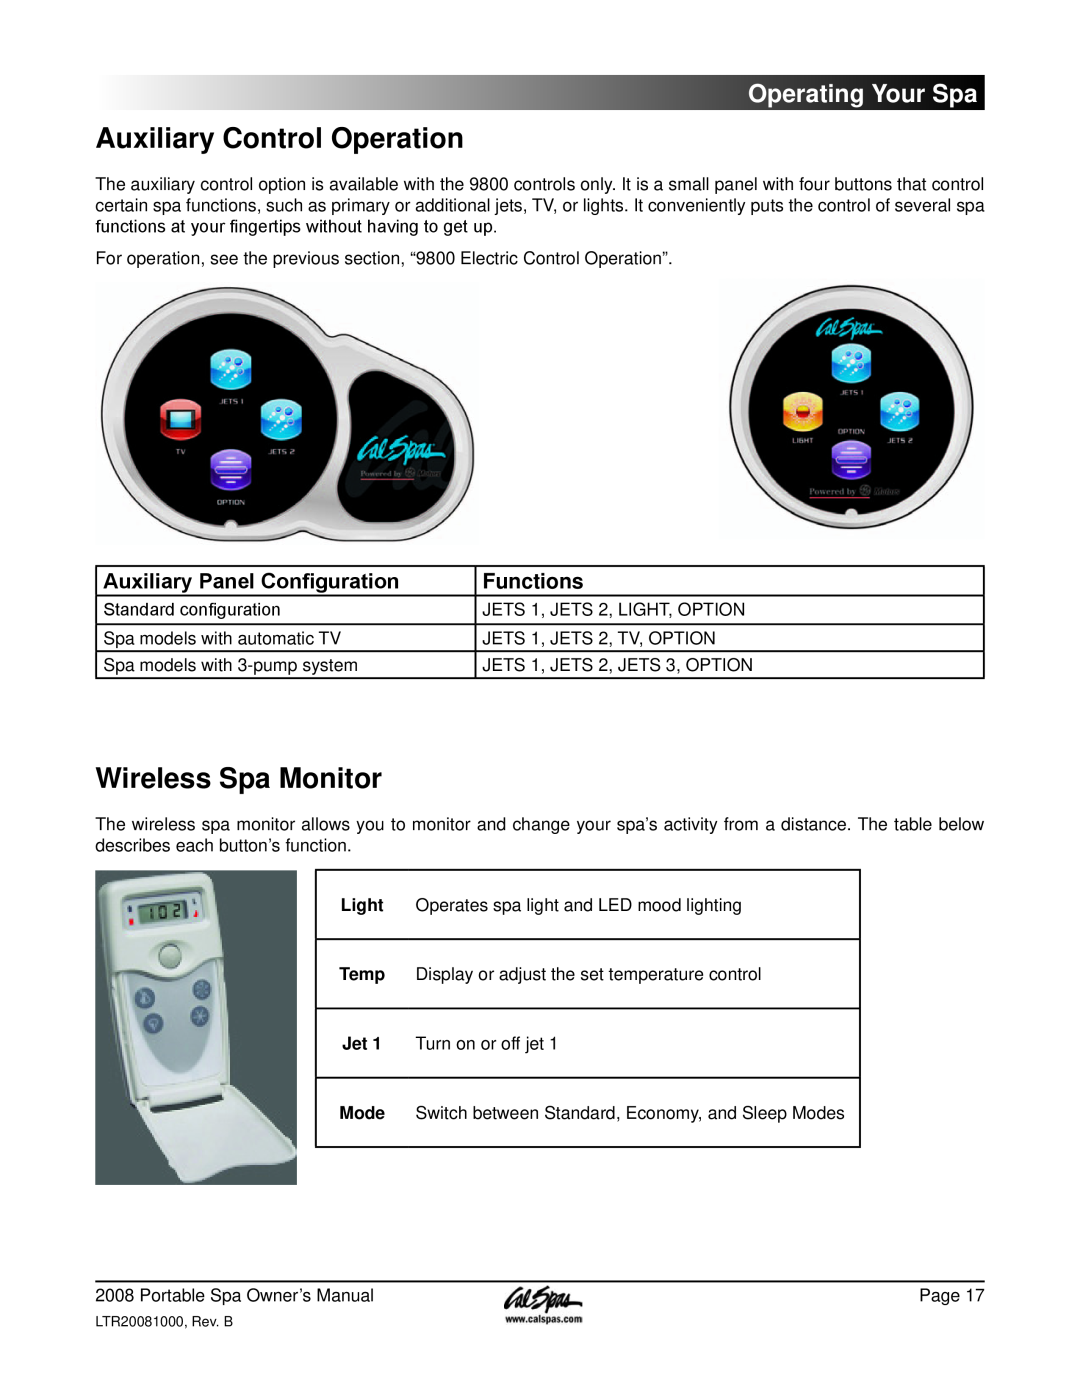 Cal Spas 5100, 6300, 6200 manual Auxiliary Control Operation, Wireless Spa Monitor, Auxiliary Panel Configuration, Functions 